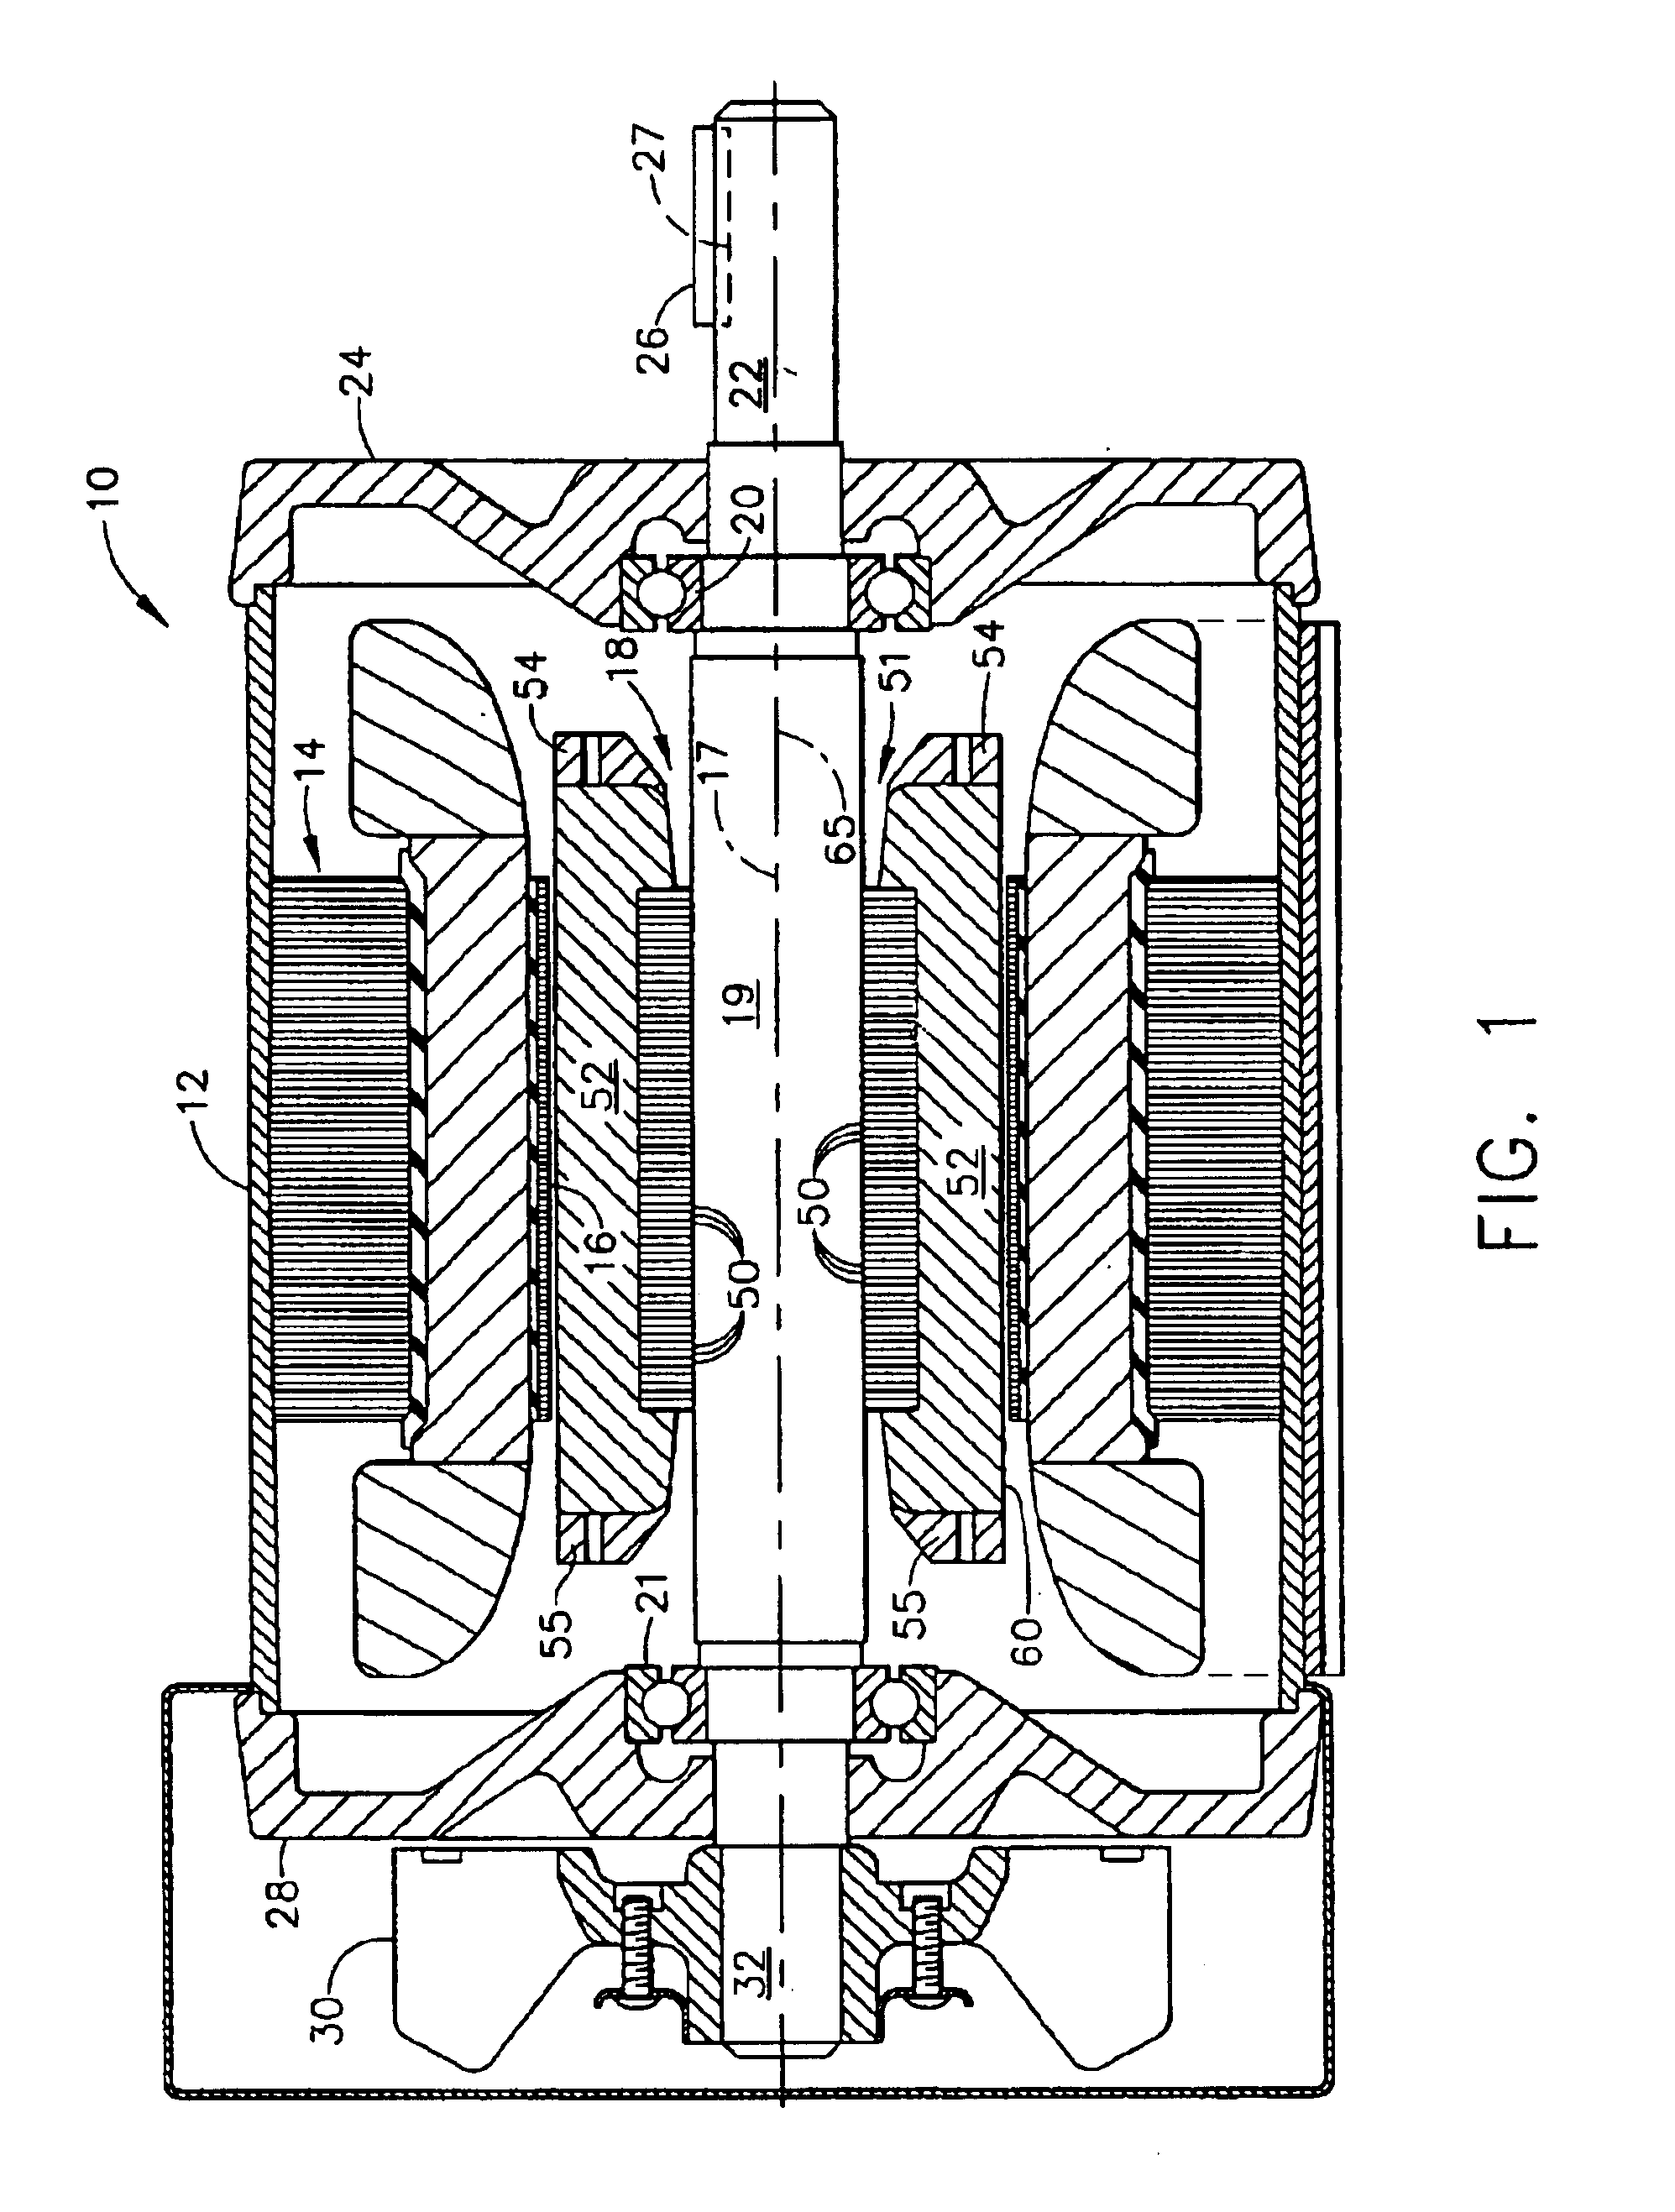 Method and apparatus for reducing dynamo-electric machine vibration